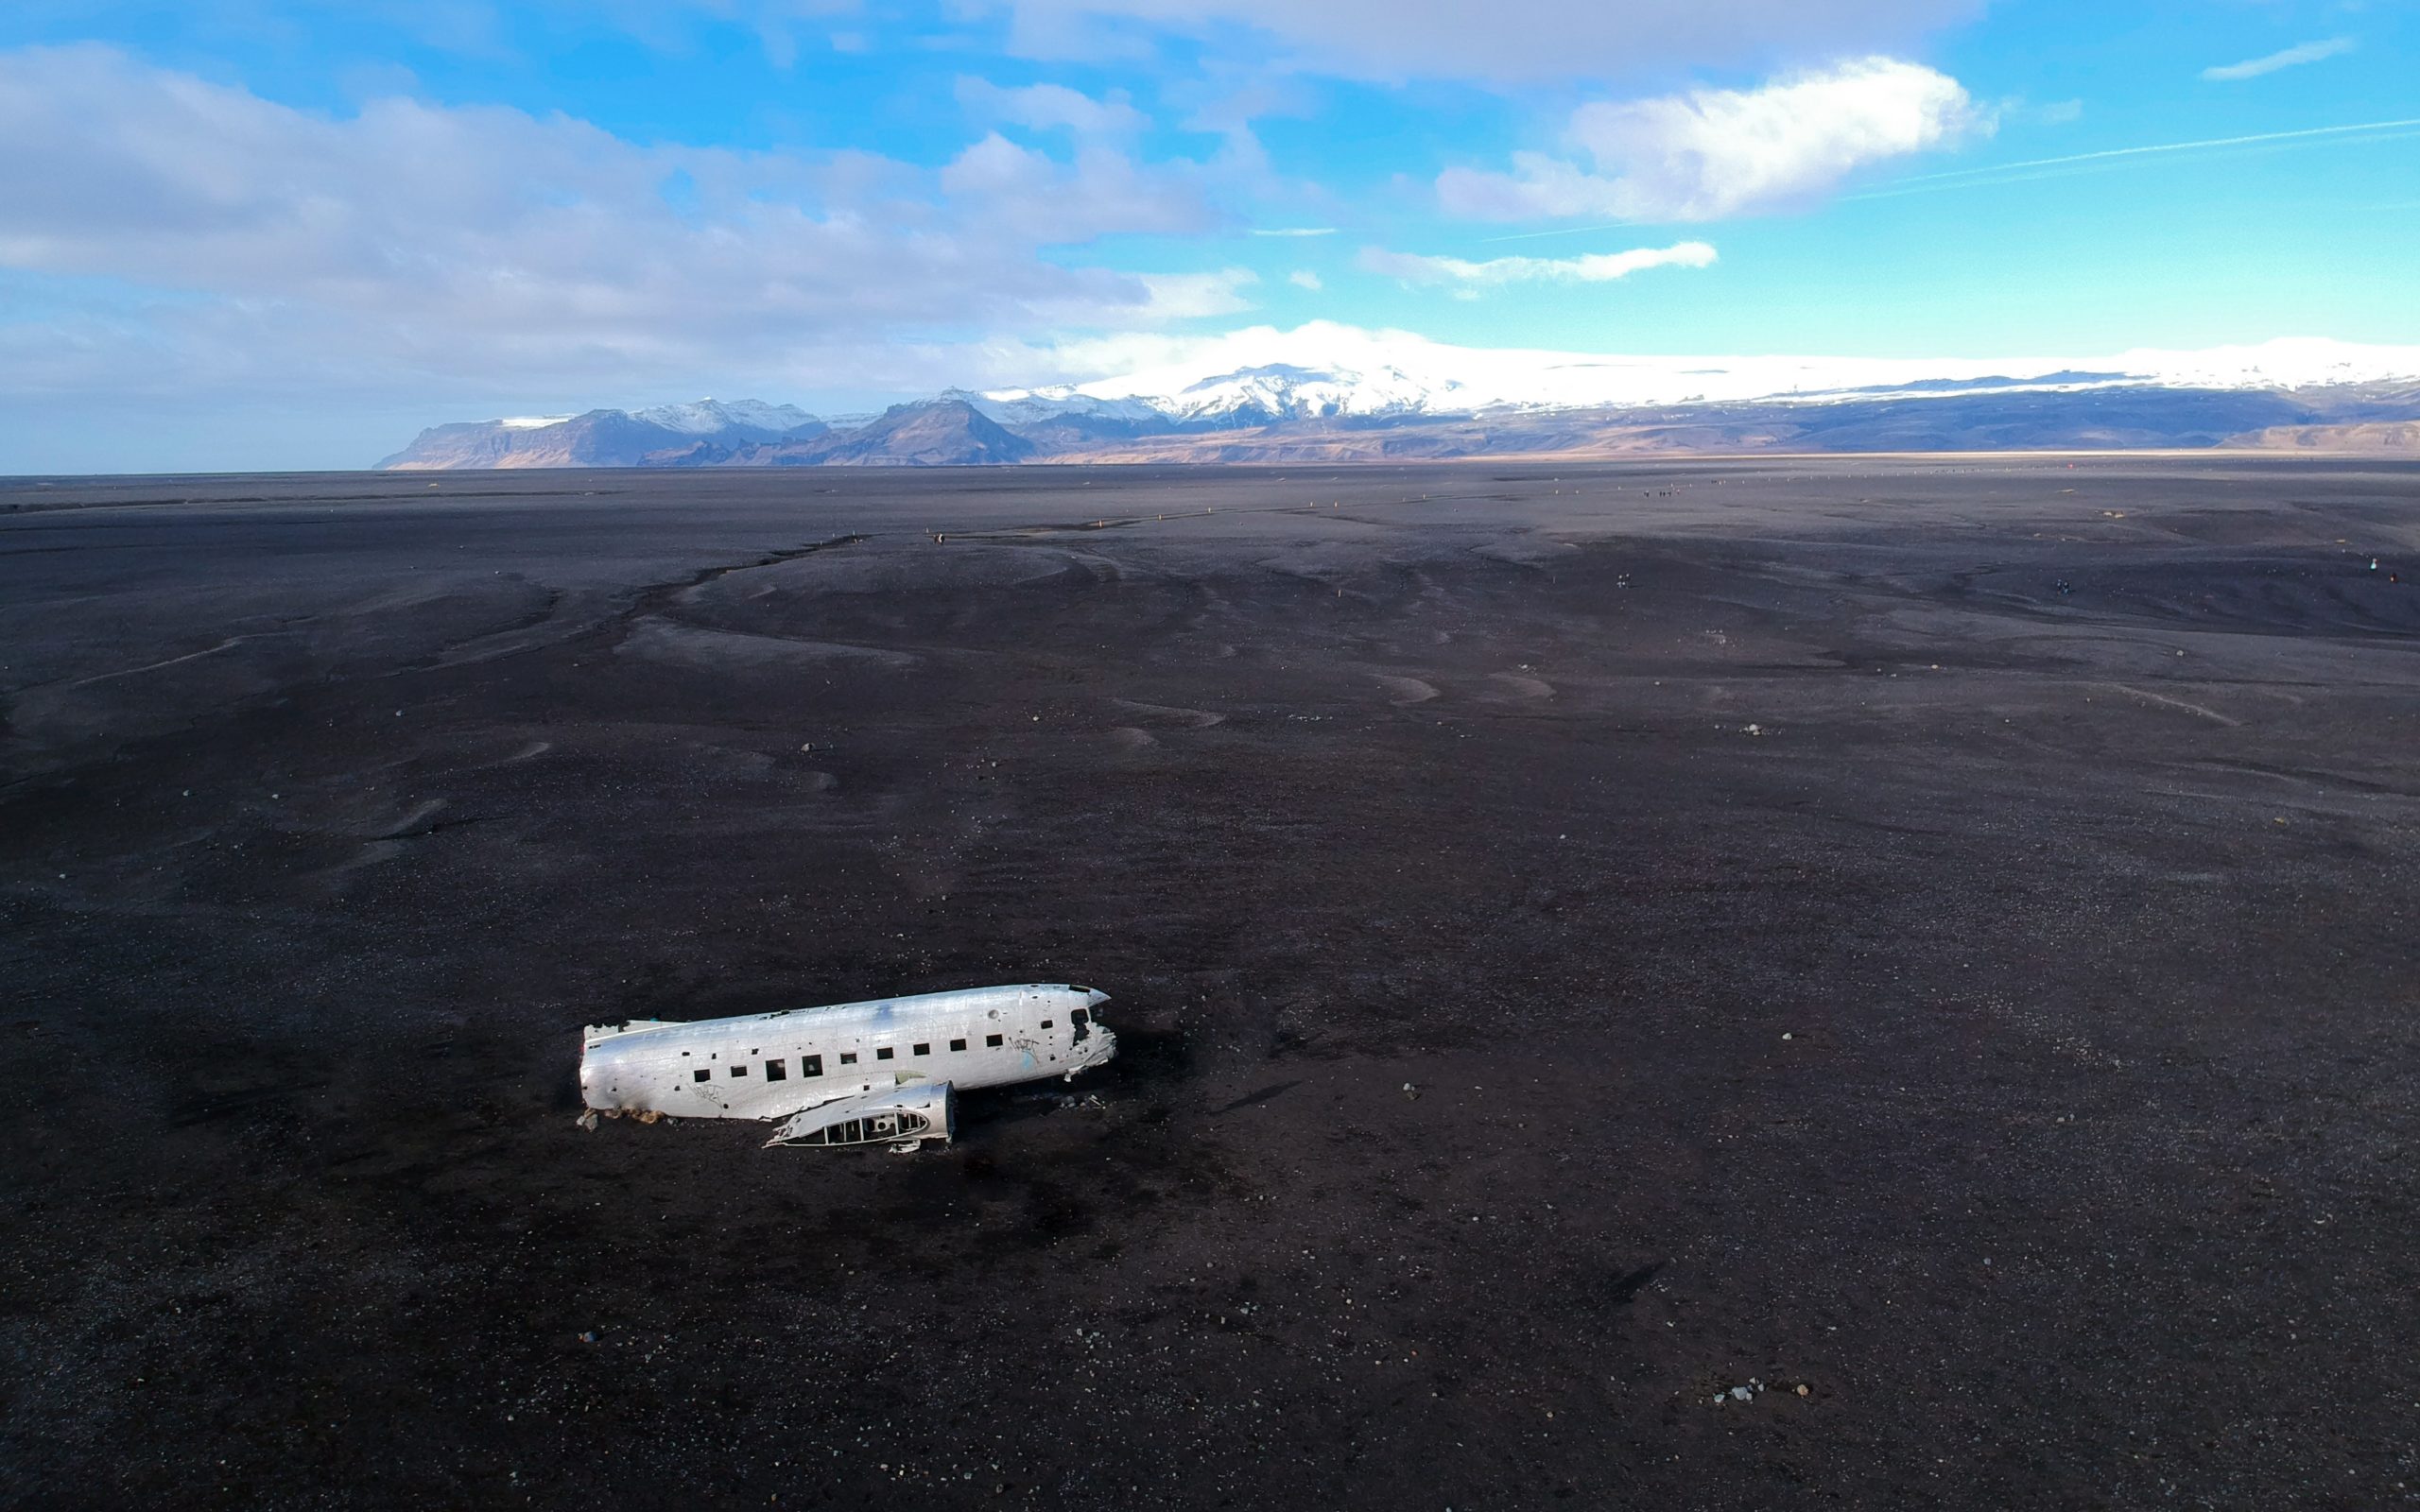 The plane wreck in Iceland is surrounded by black sand desert